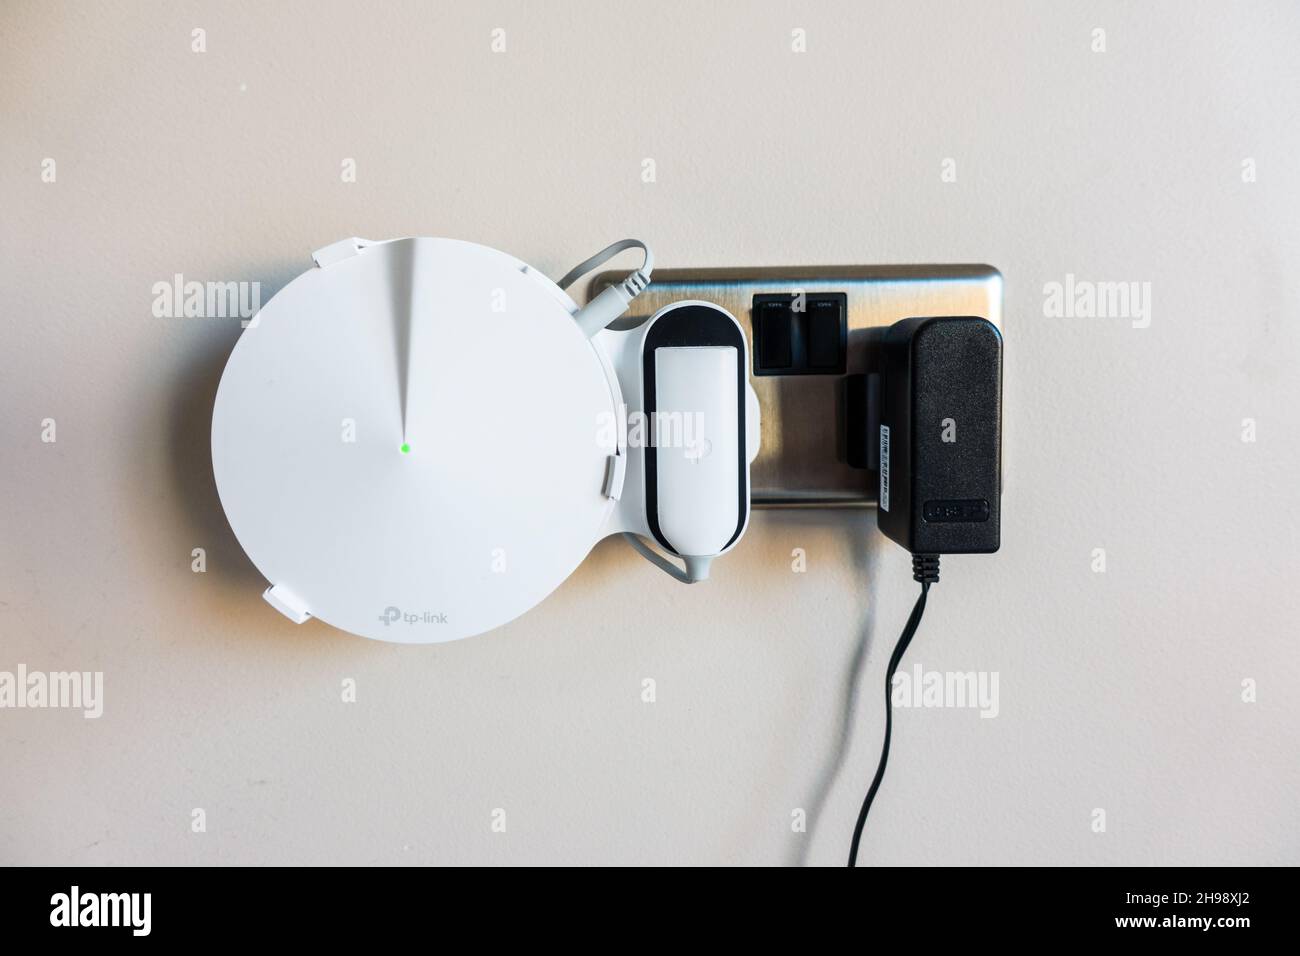 Whole Home WiFi systems / WiFi Mesh device tucked into a holder next to plug point Stock Photo